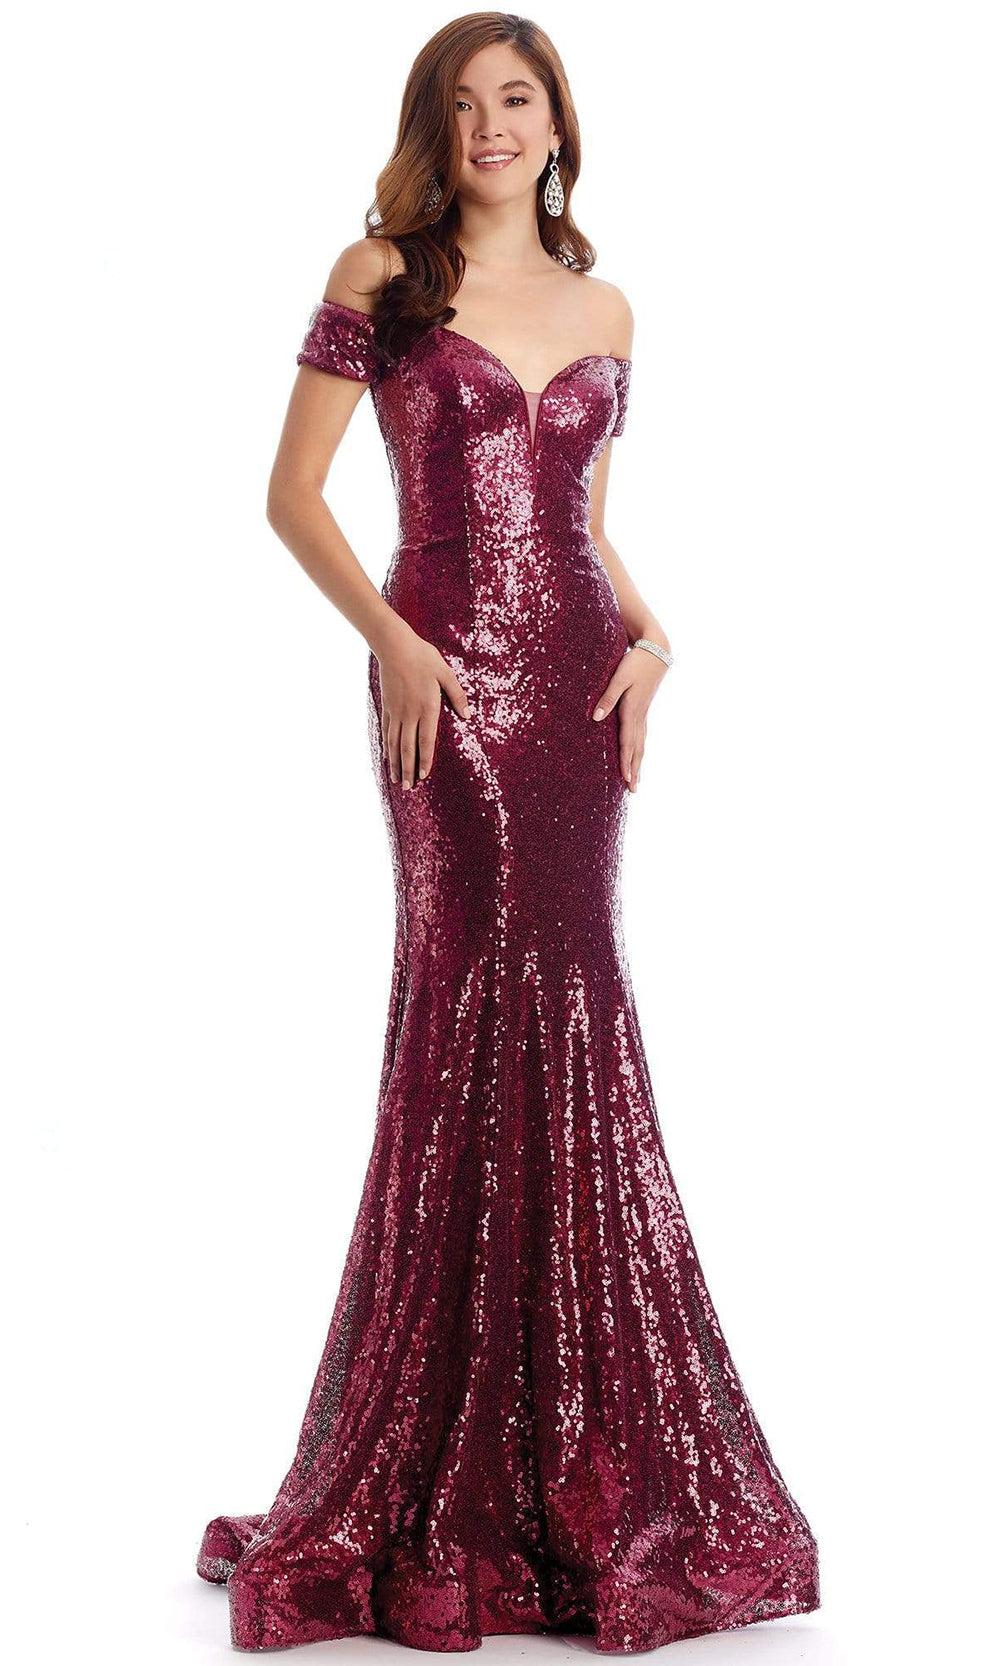 Clarisse - 8238 Off-Shoulder Sweetheart Neckline Full Sequins Trumpet Dress - 1 pc Navy In Size 0 Available CCSALE 0 / Navy